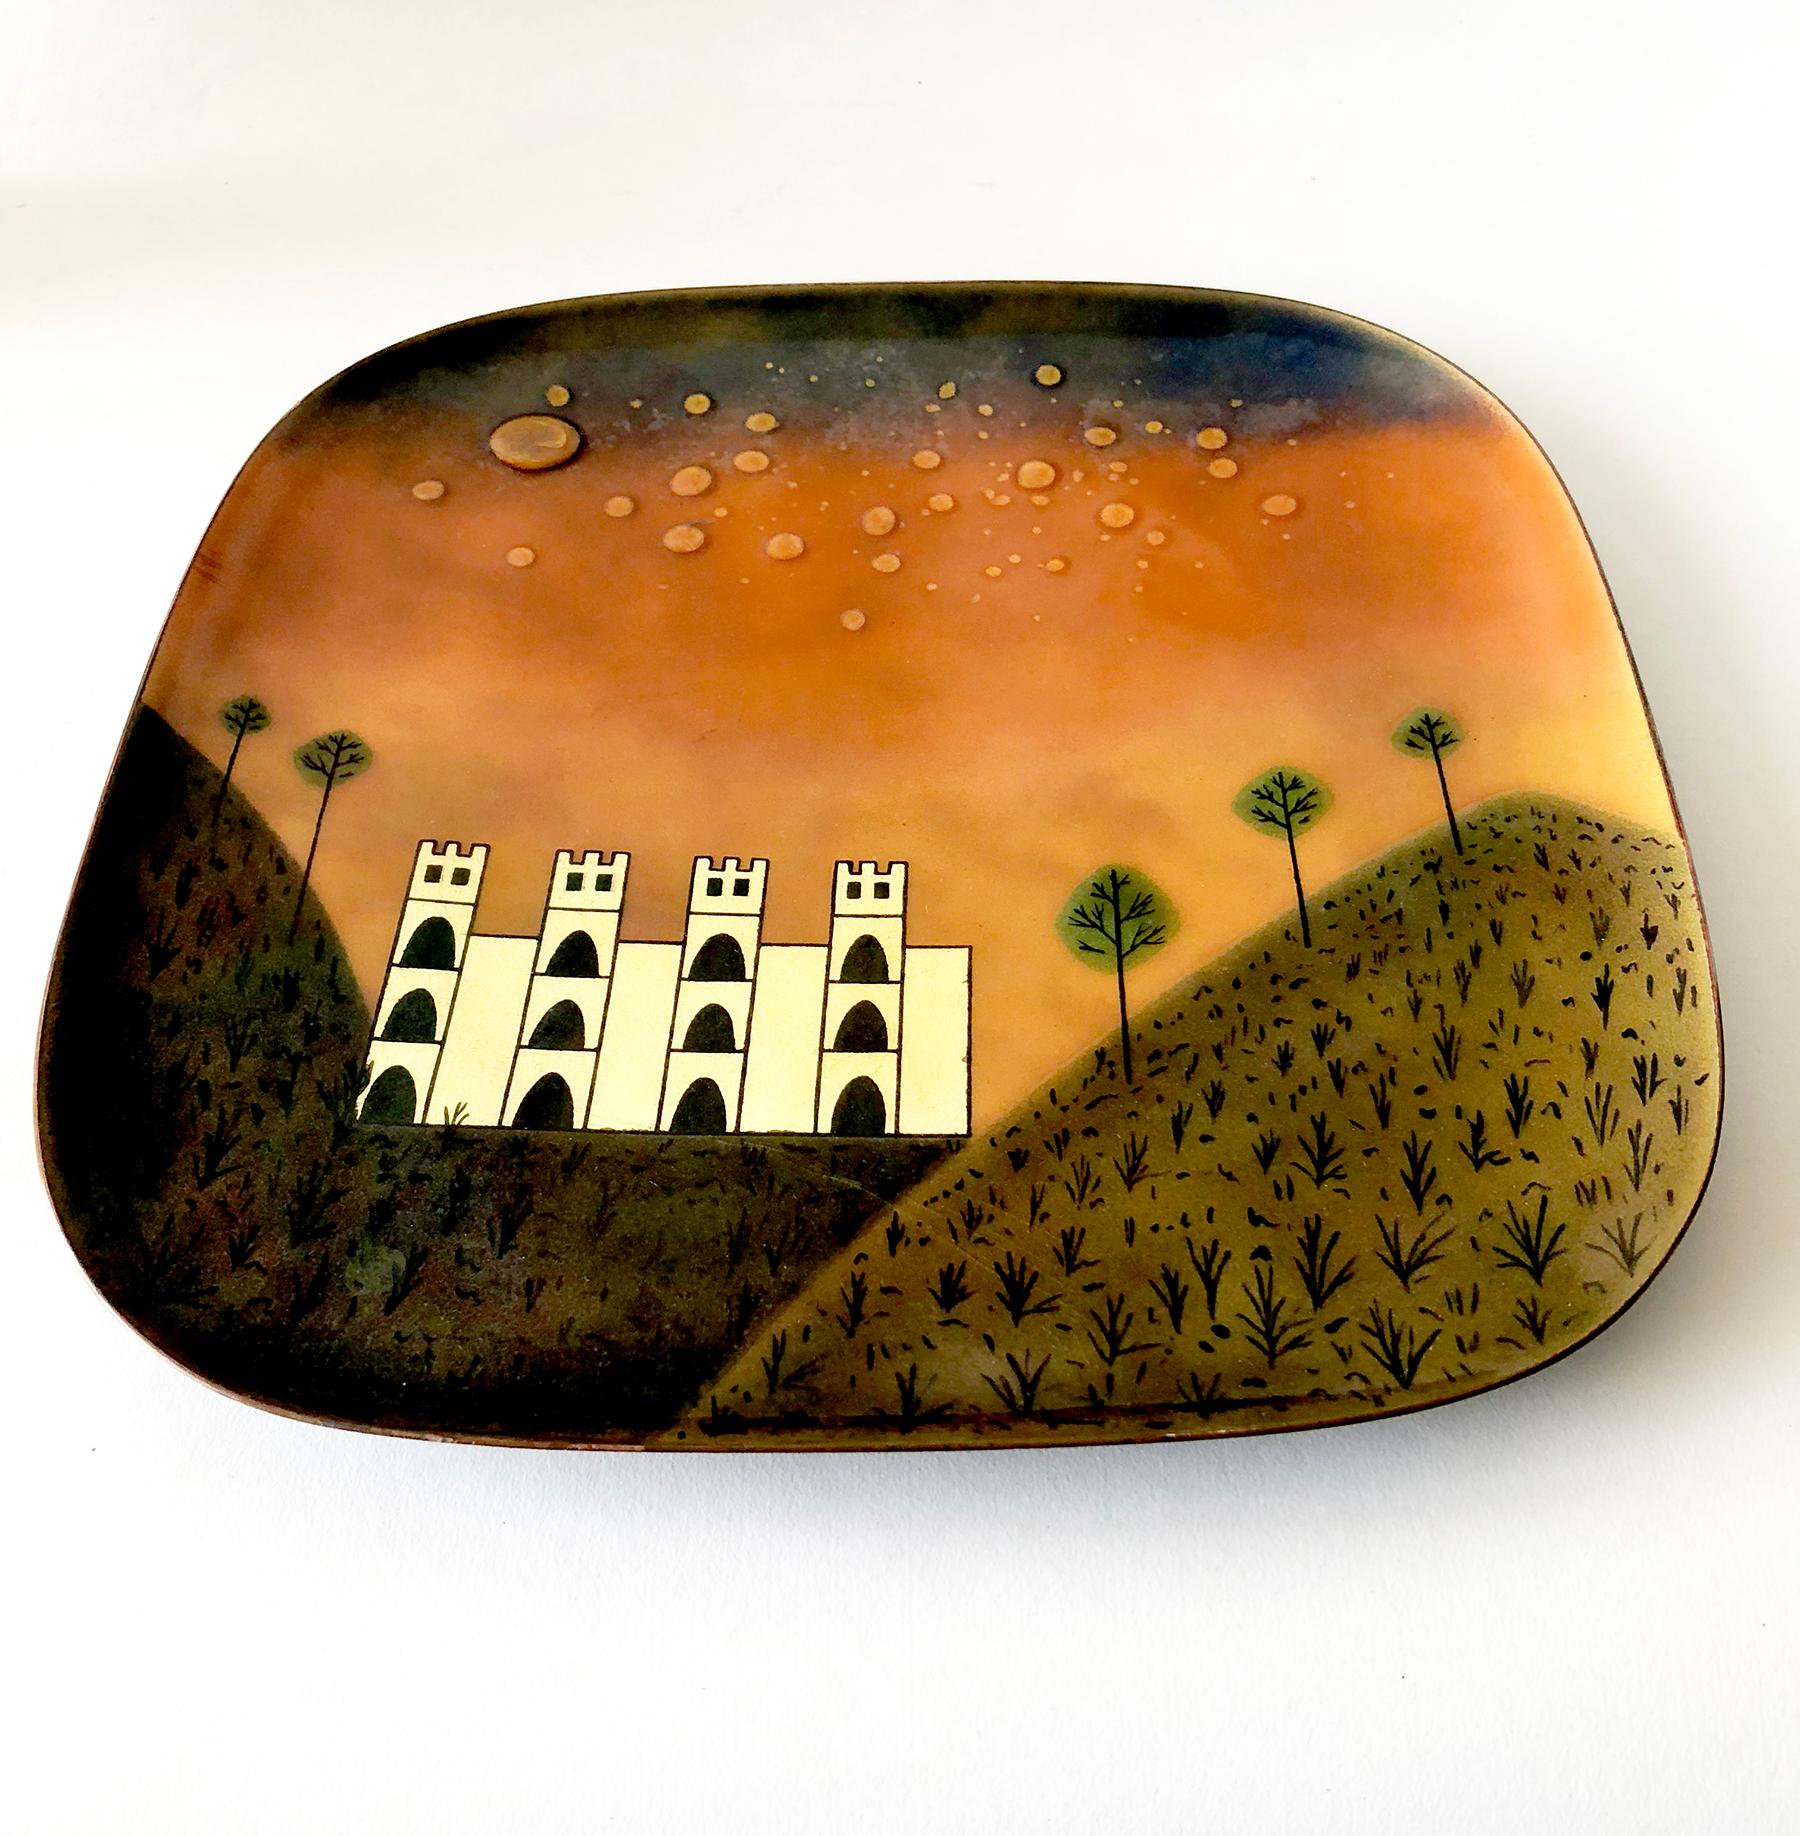 High quality copper enamel tray created by Miguel Pineda of Mexico City, Mexico. Tray measures 10.75